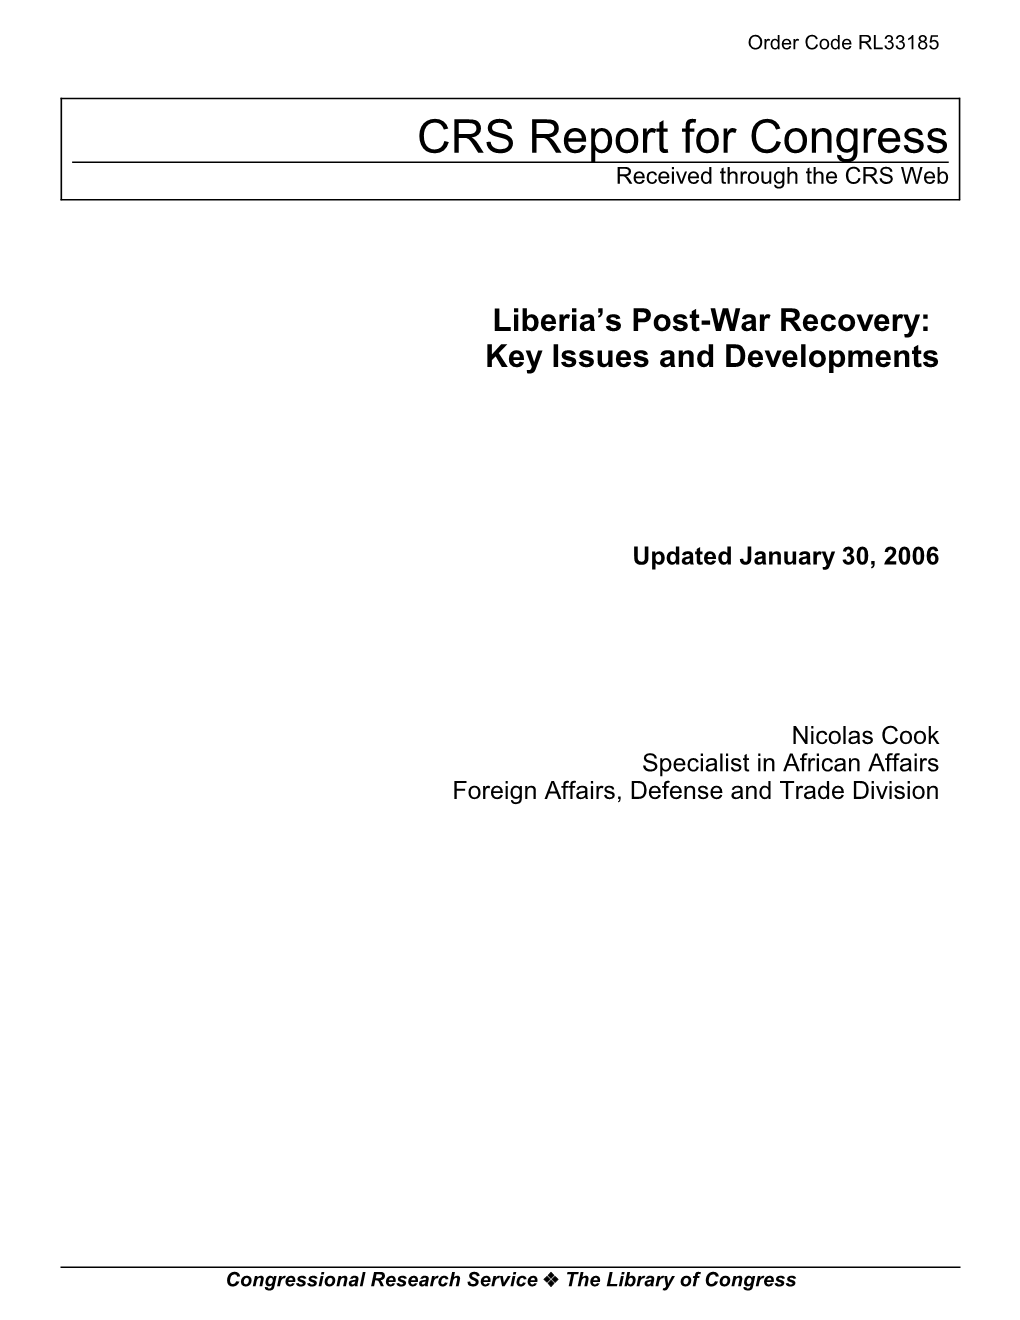 Liberia's Post-War Recovery